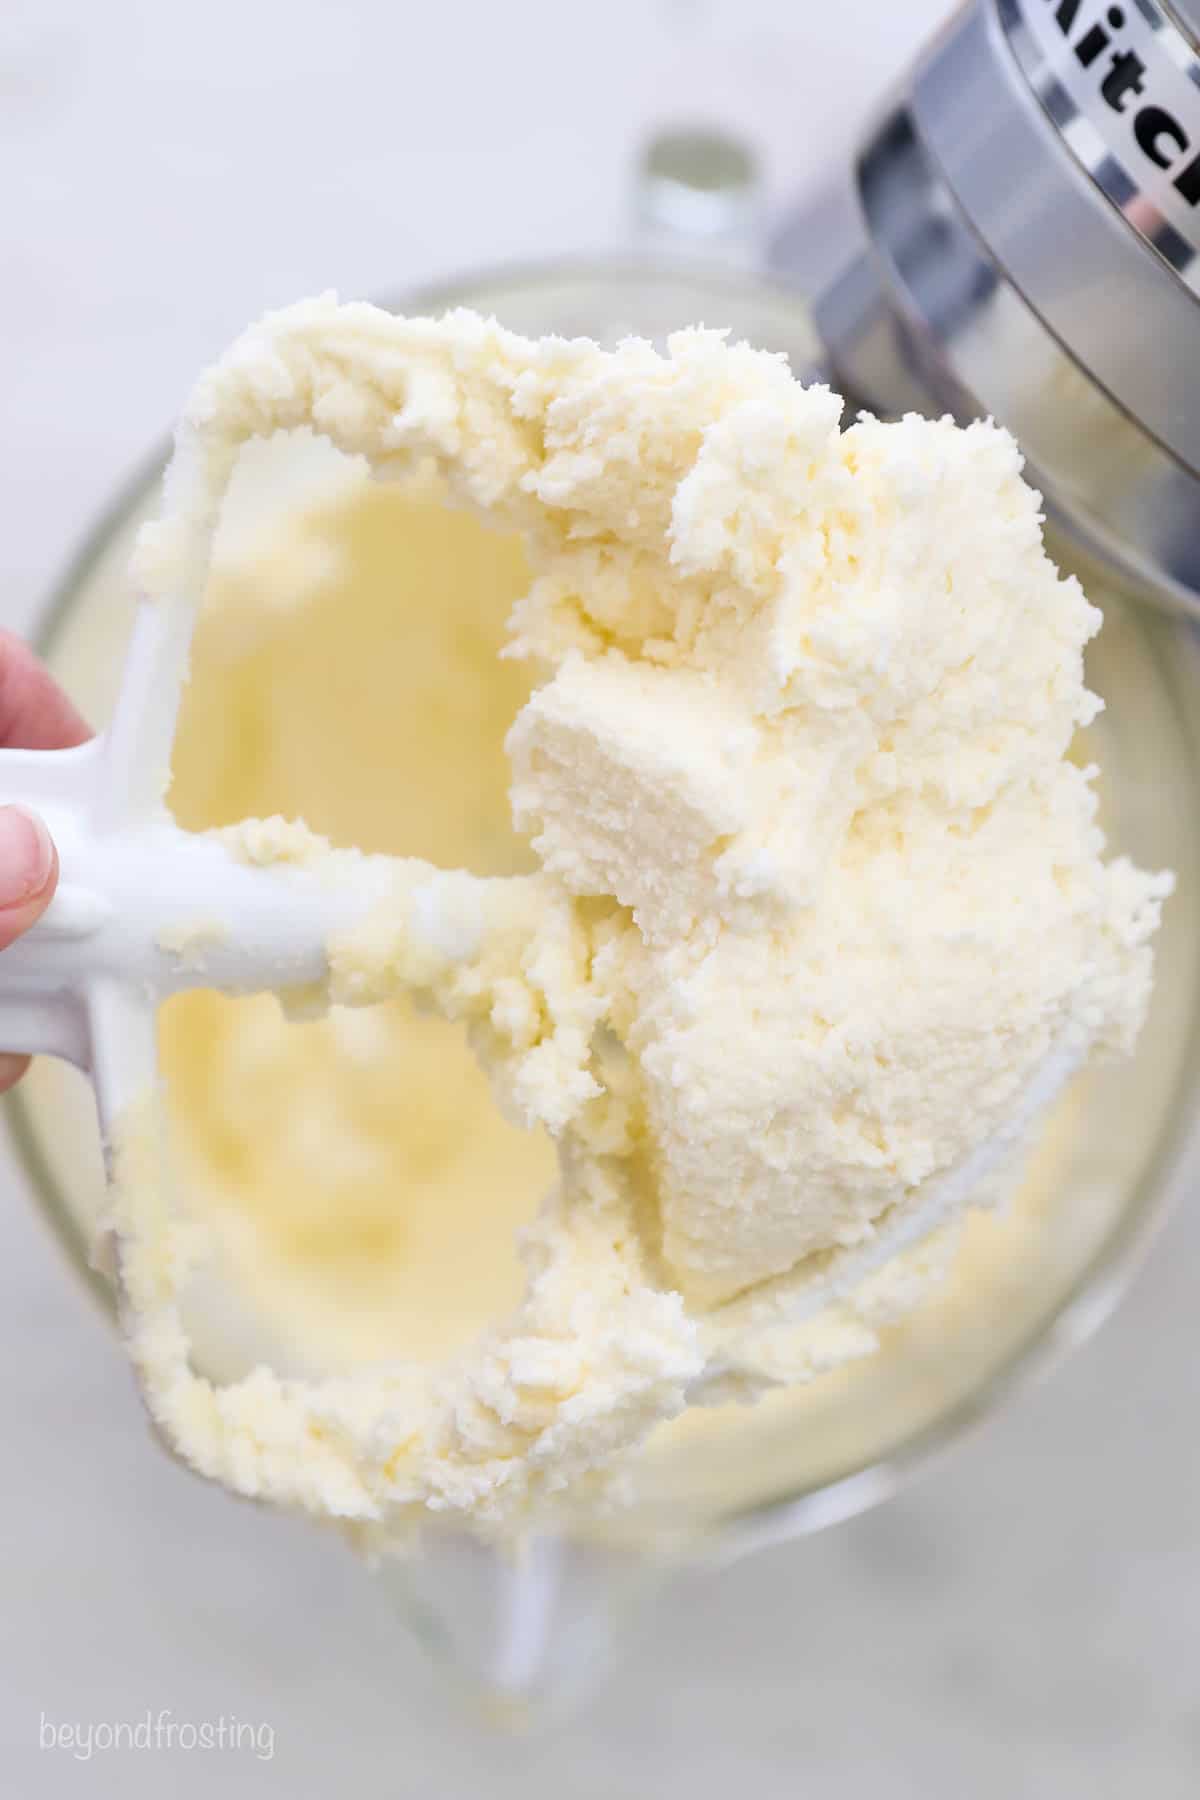 The butter and sugar being mixed together.